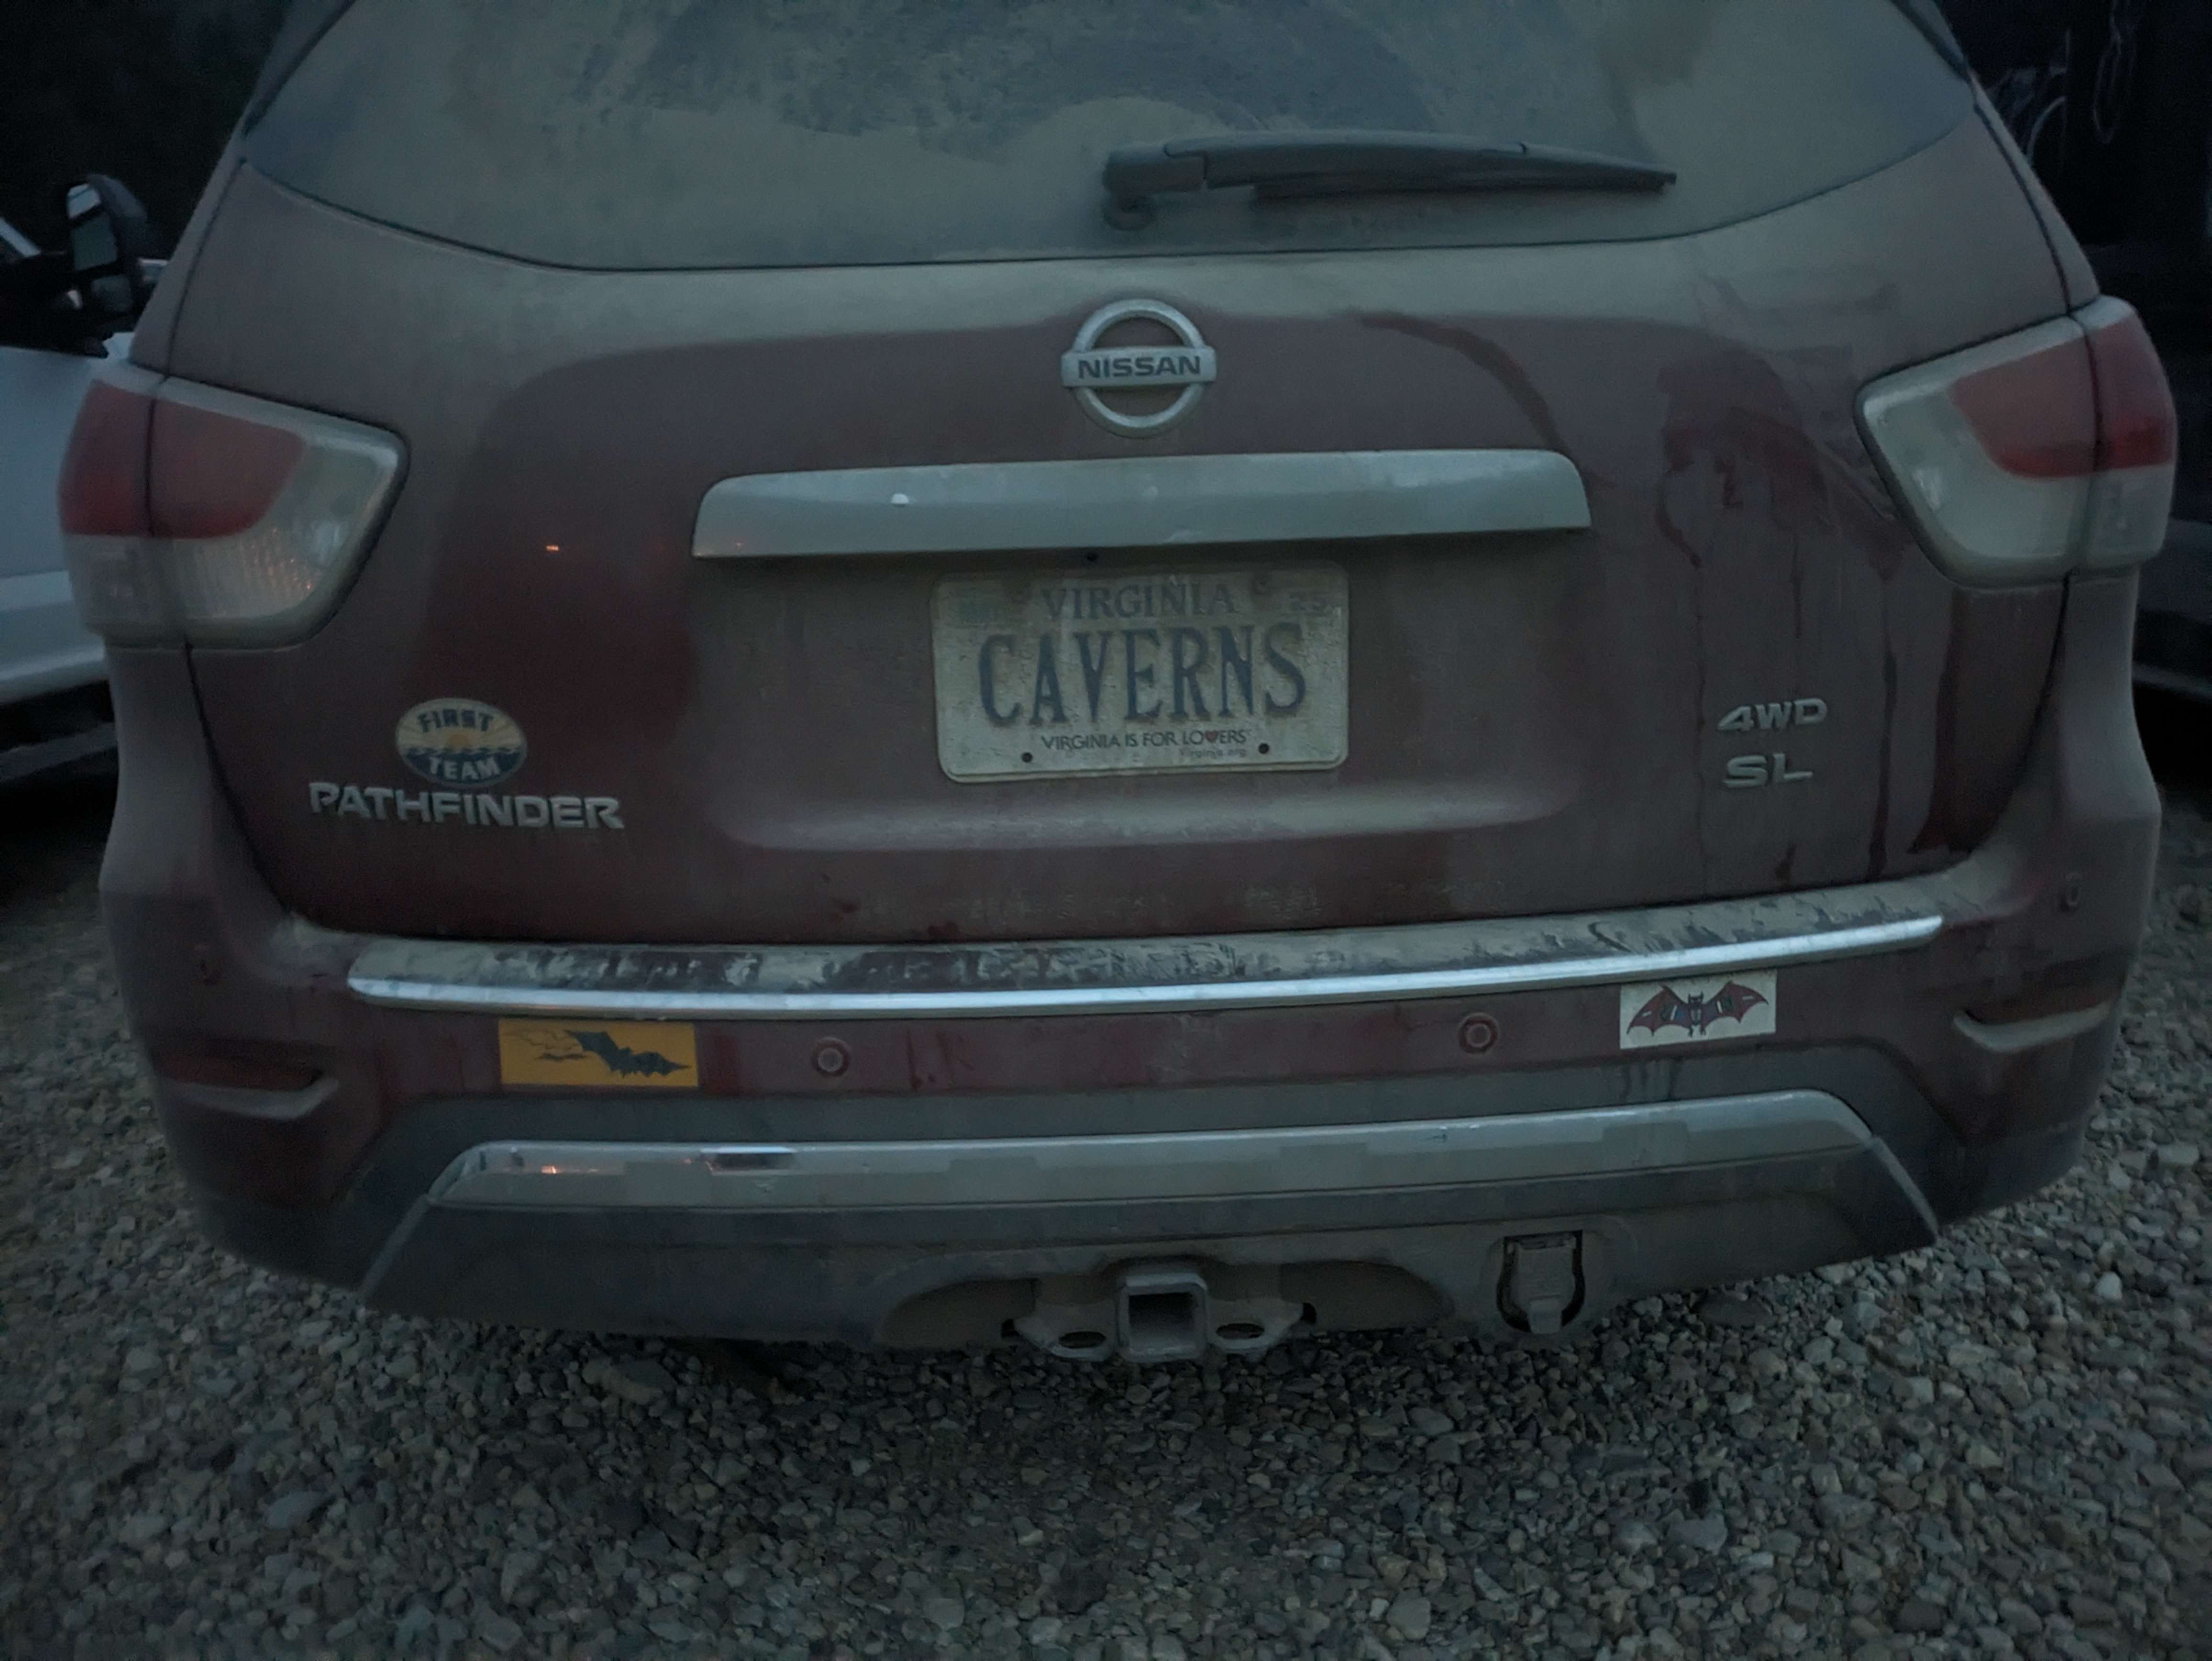 Caves rock license plate